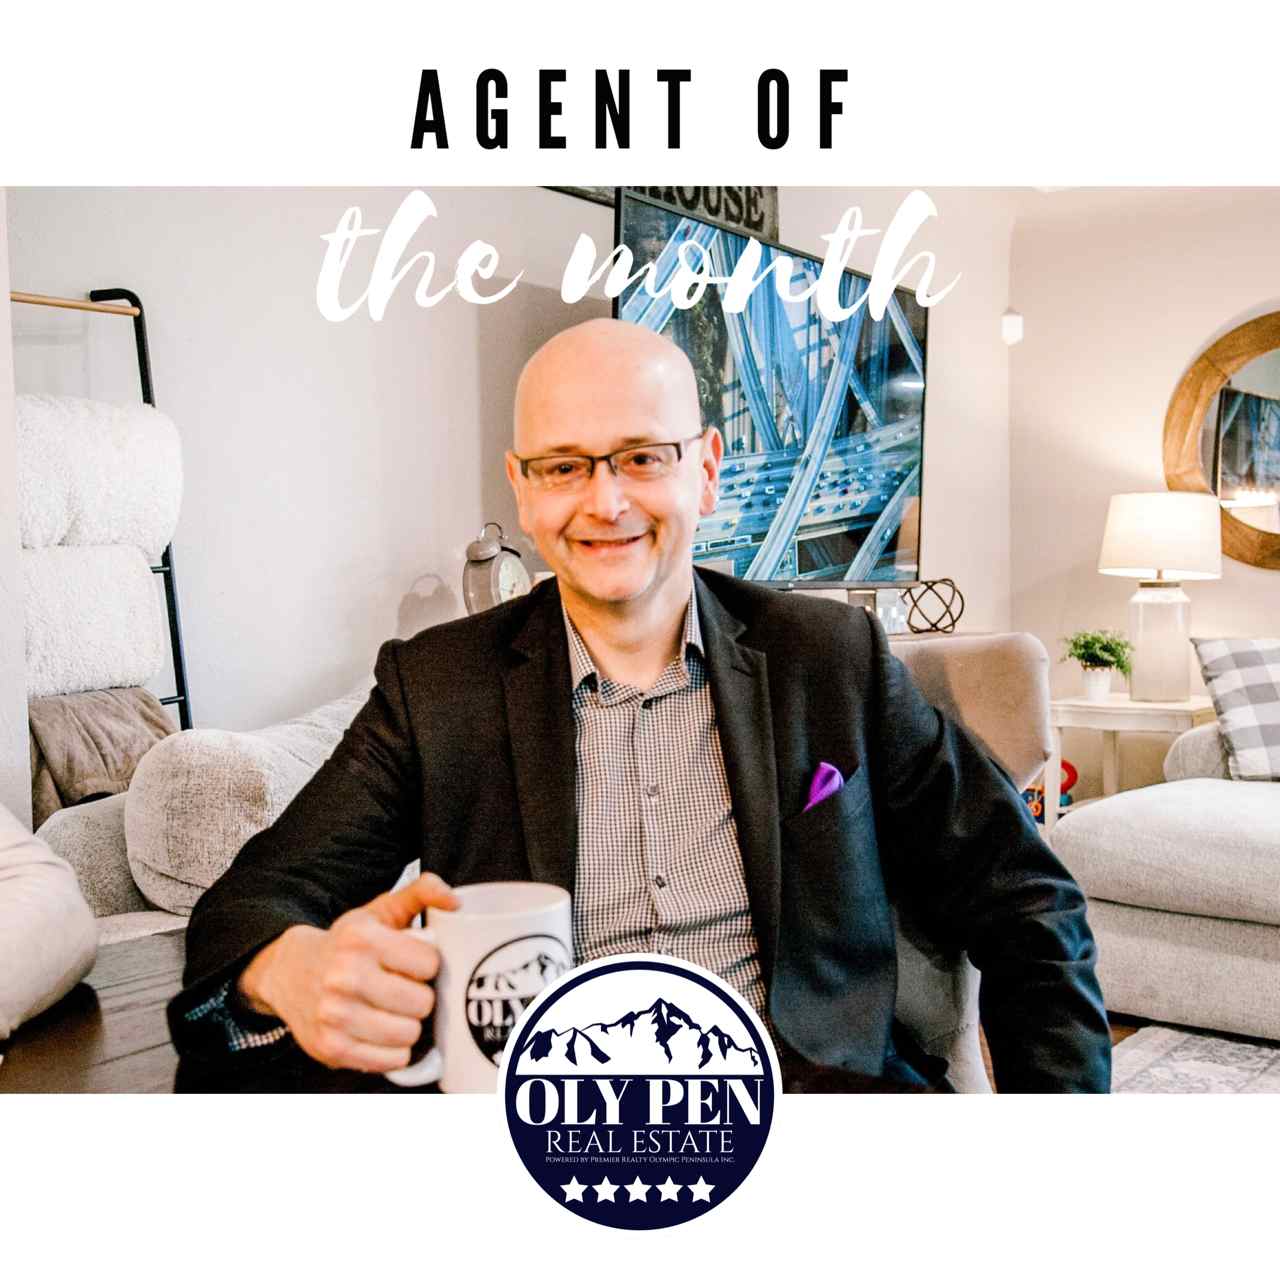 UKE BURGHER – JUNE 2020 AGENT OF THE MONTH